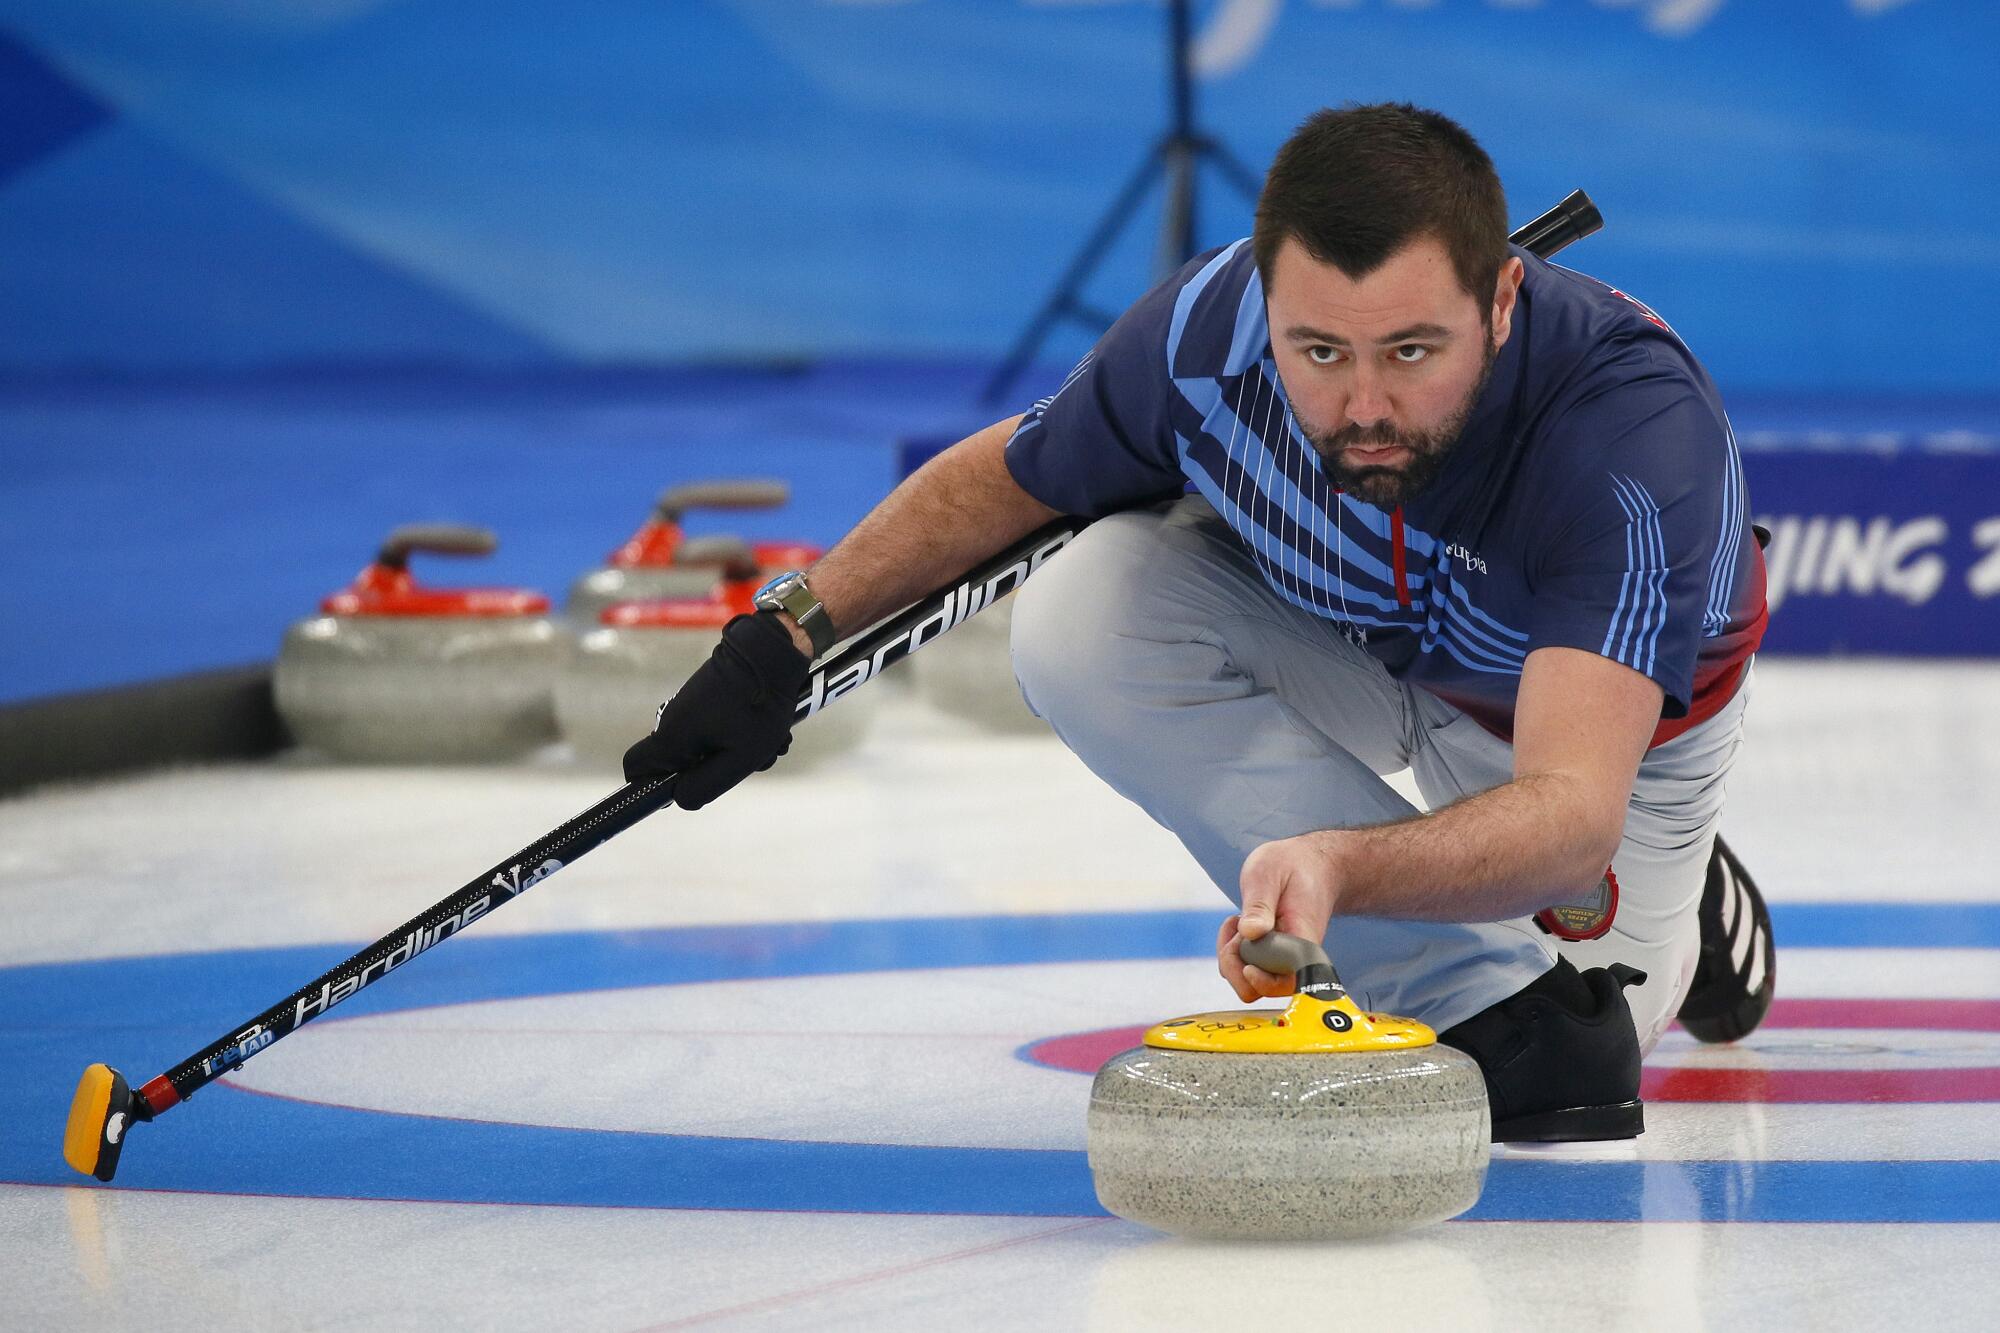 A man prepares to release the curling stone.